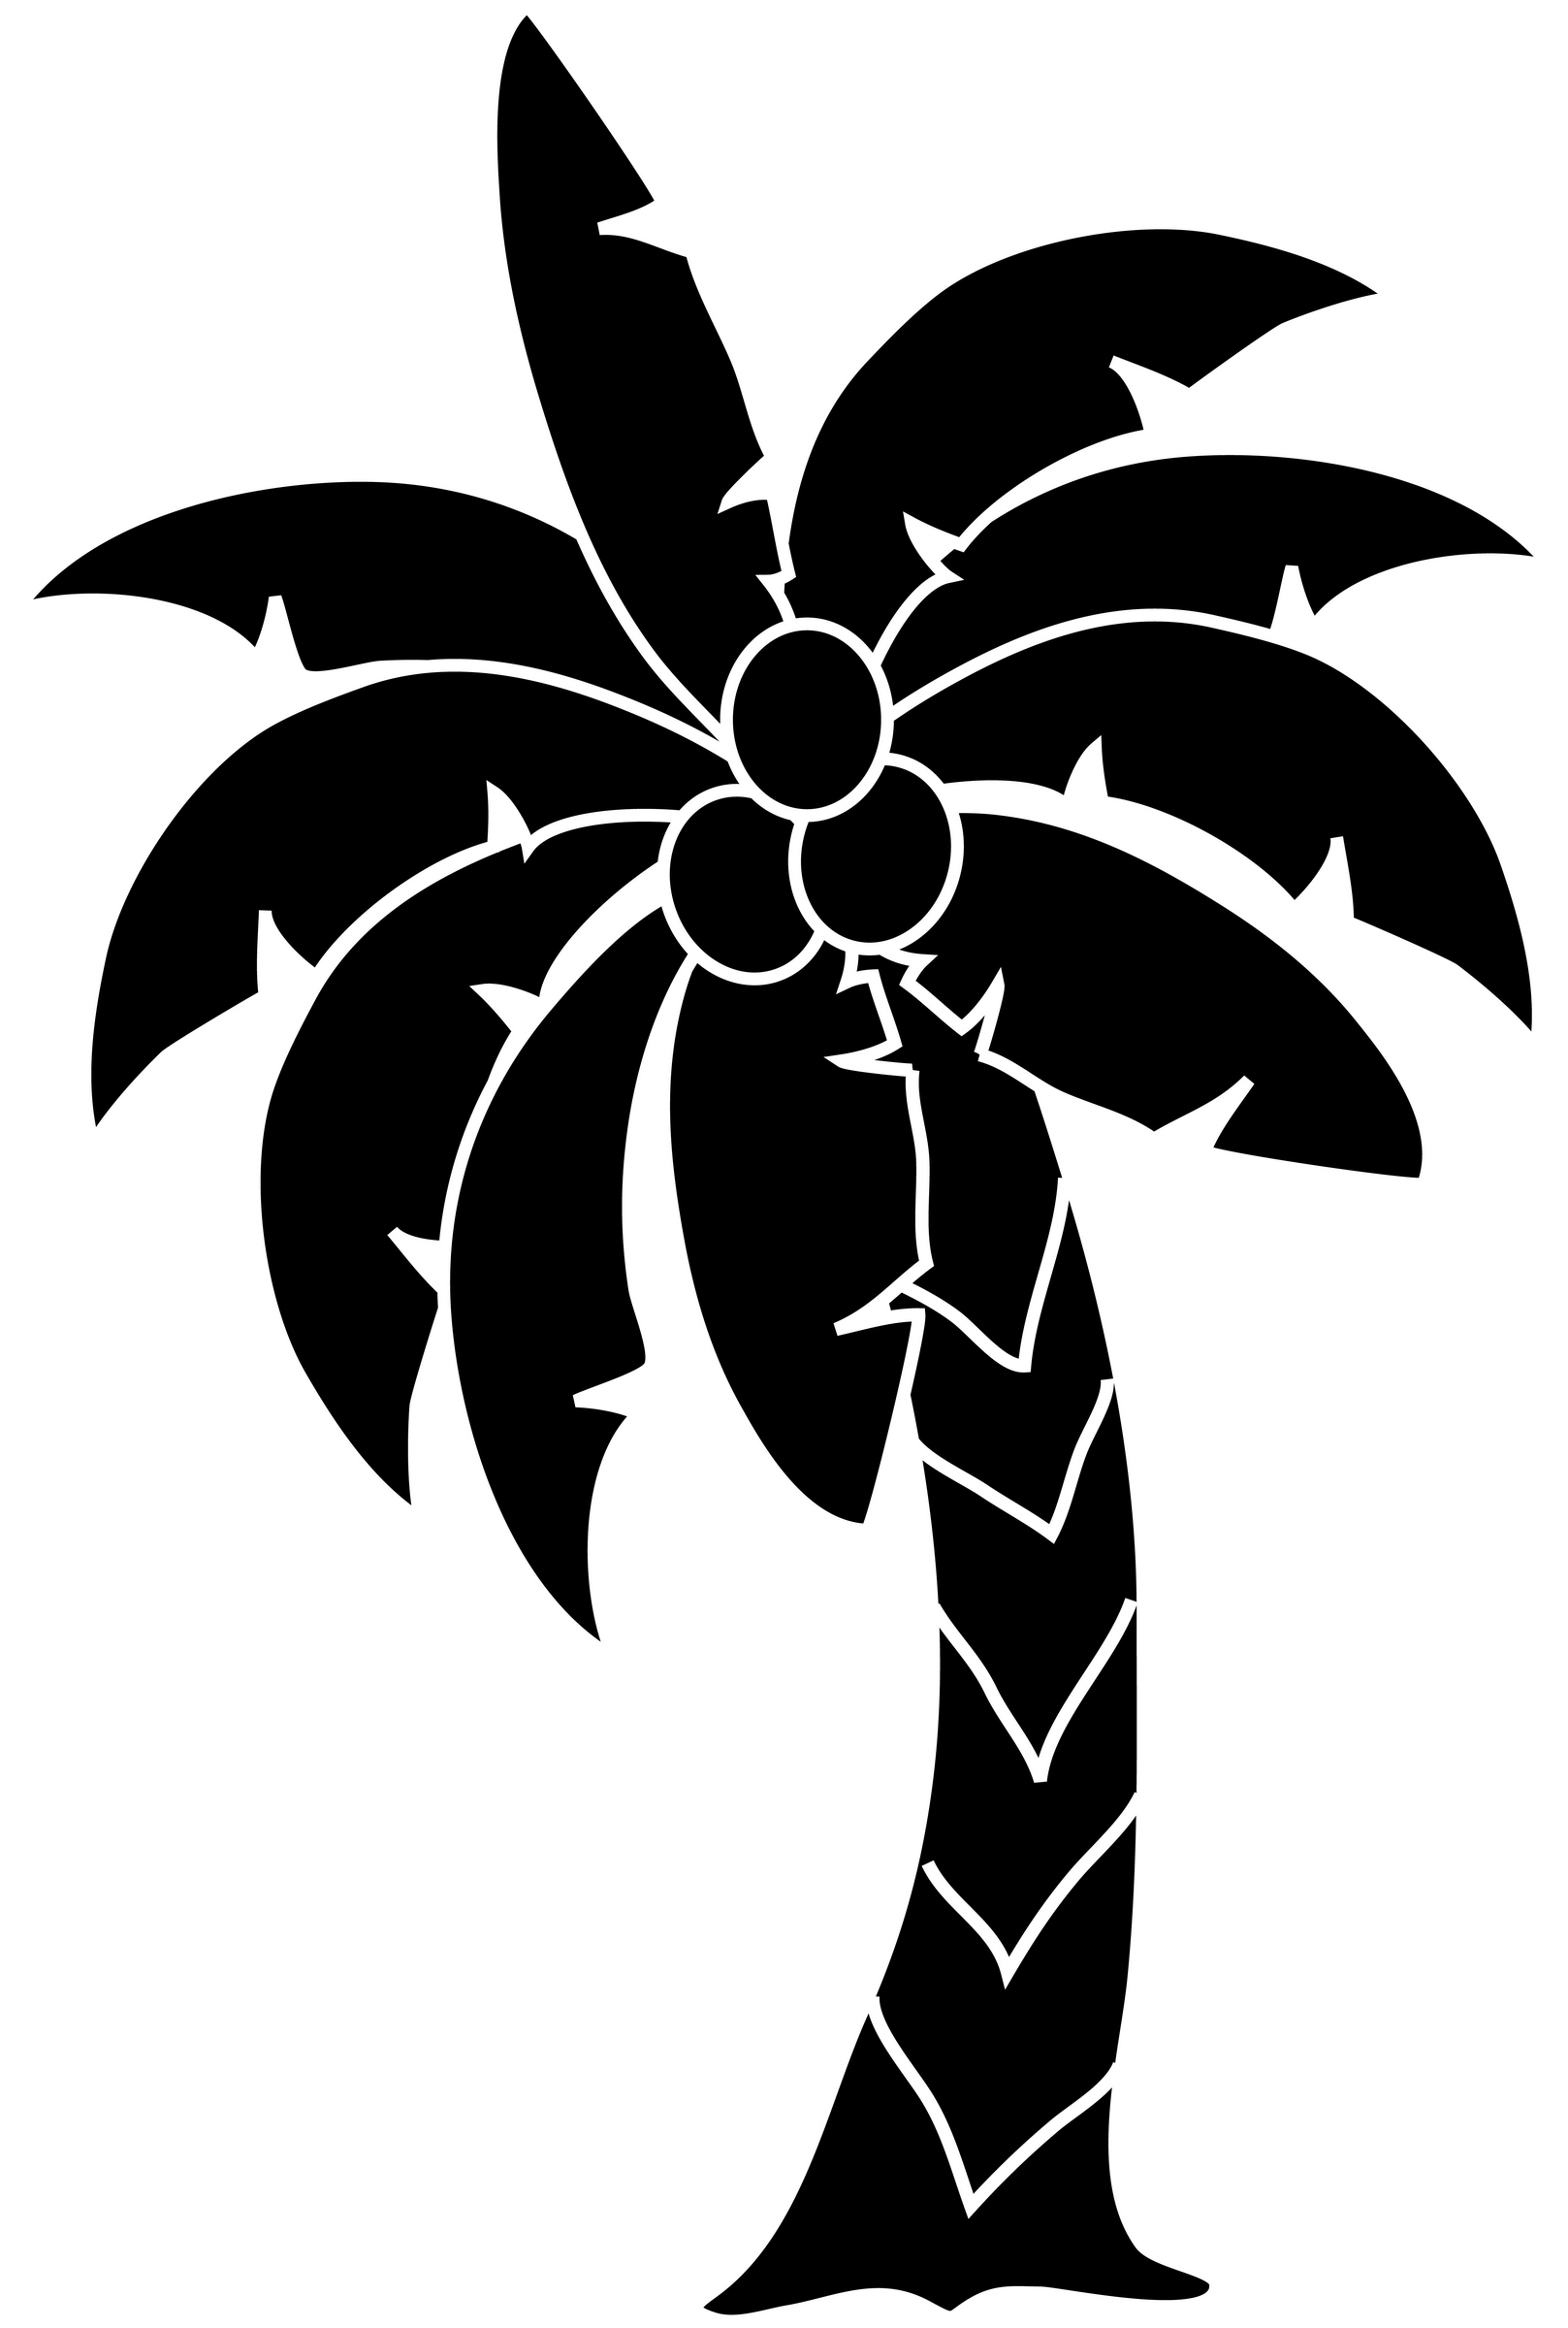 Palm tree beach clipart free clipart images clipartix